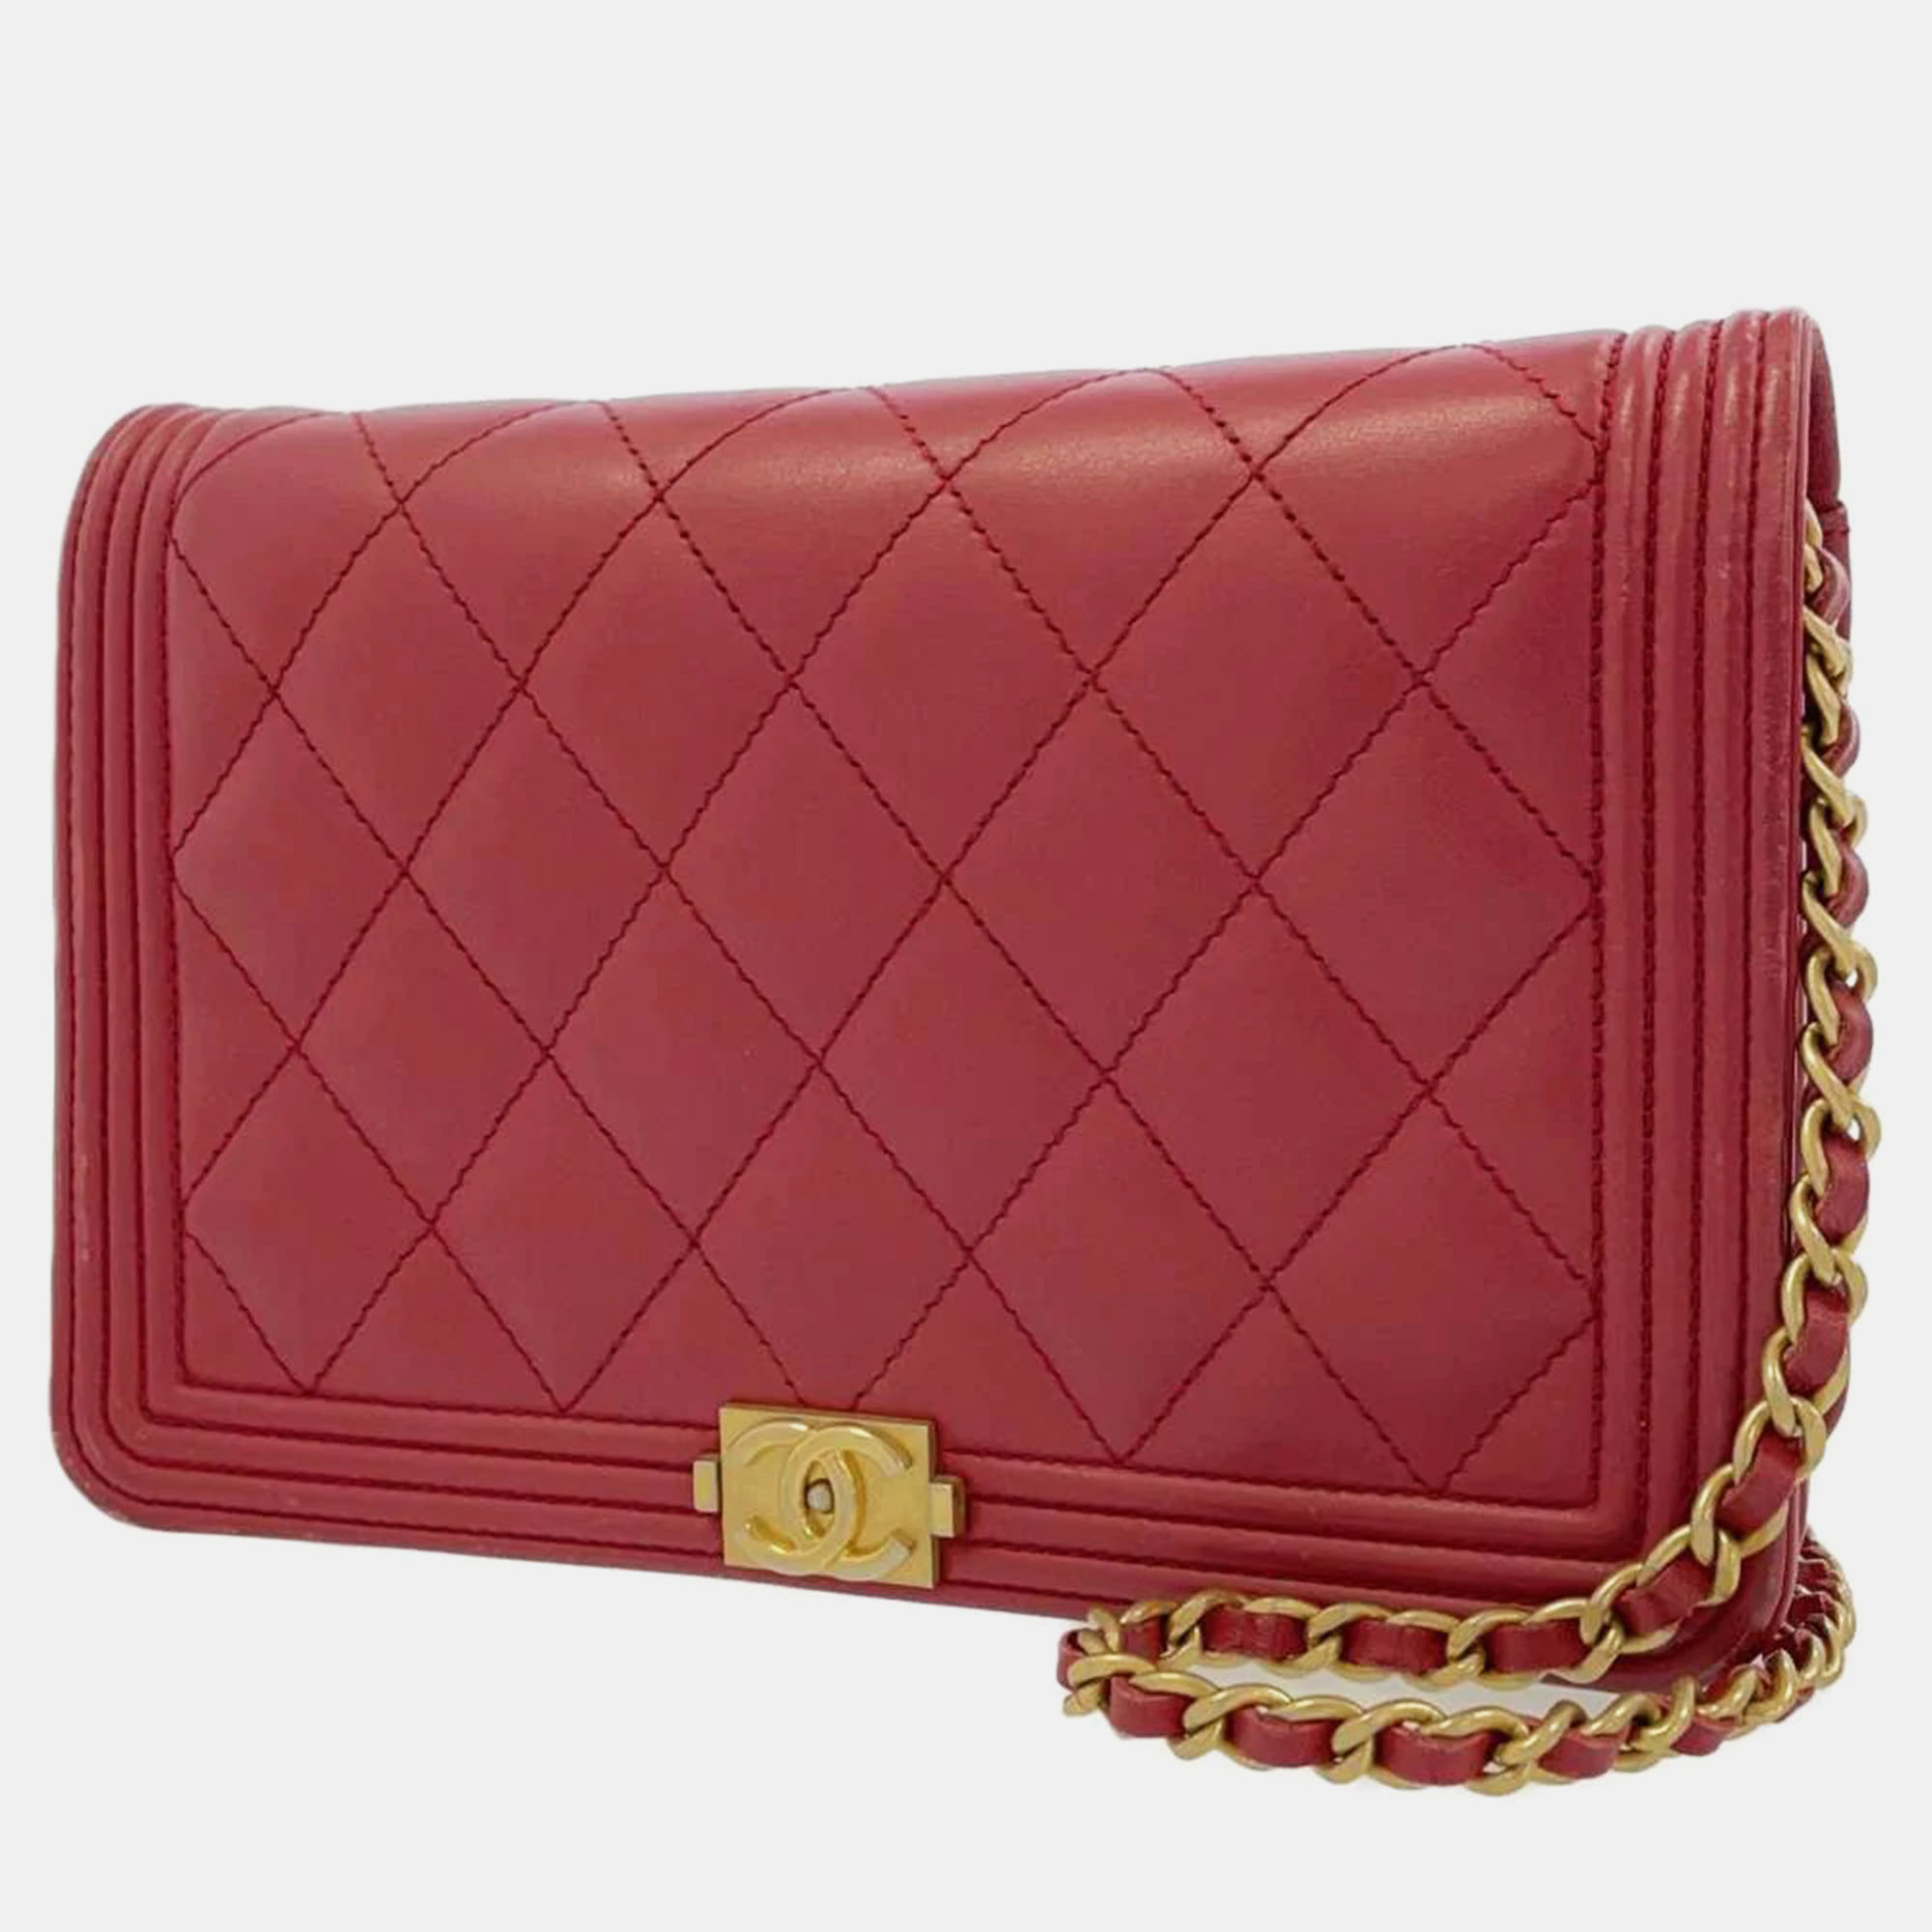 Chanel red leather boy wallet on chain